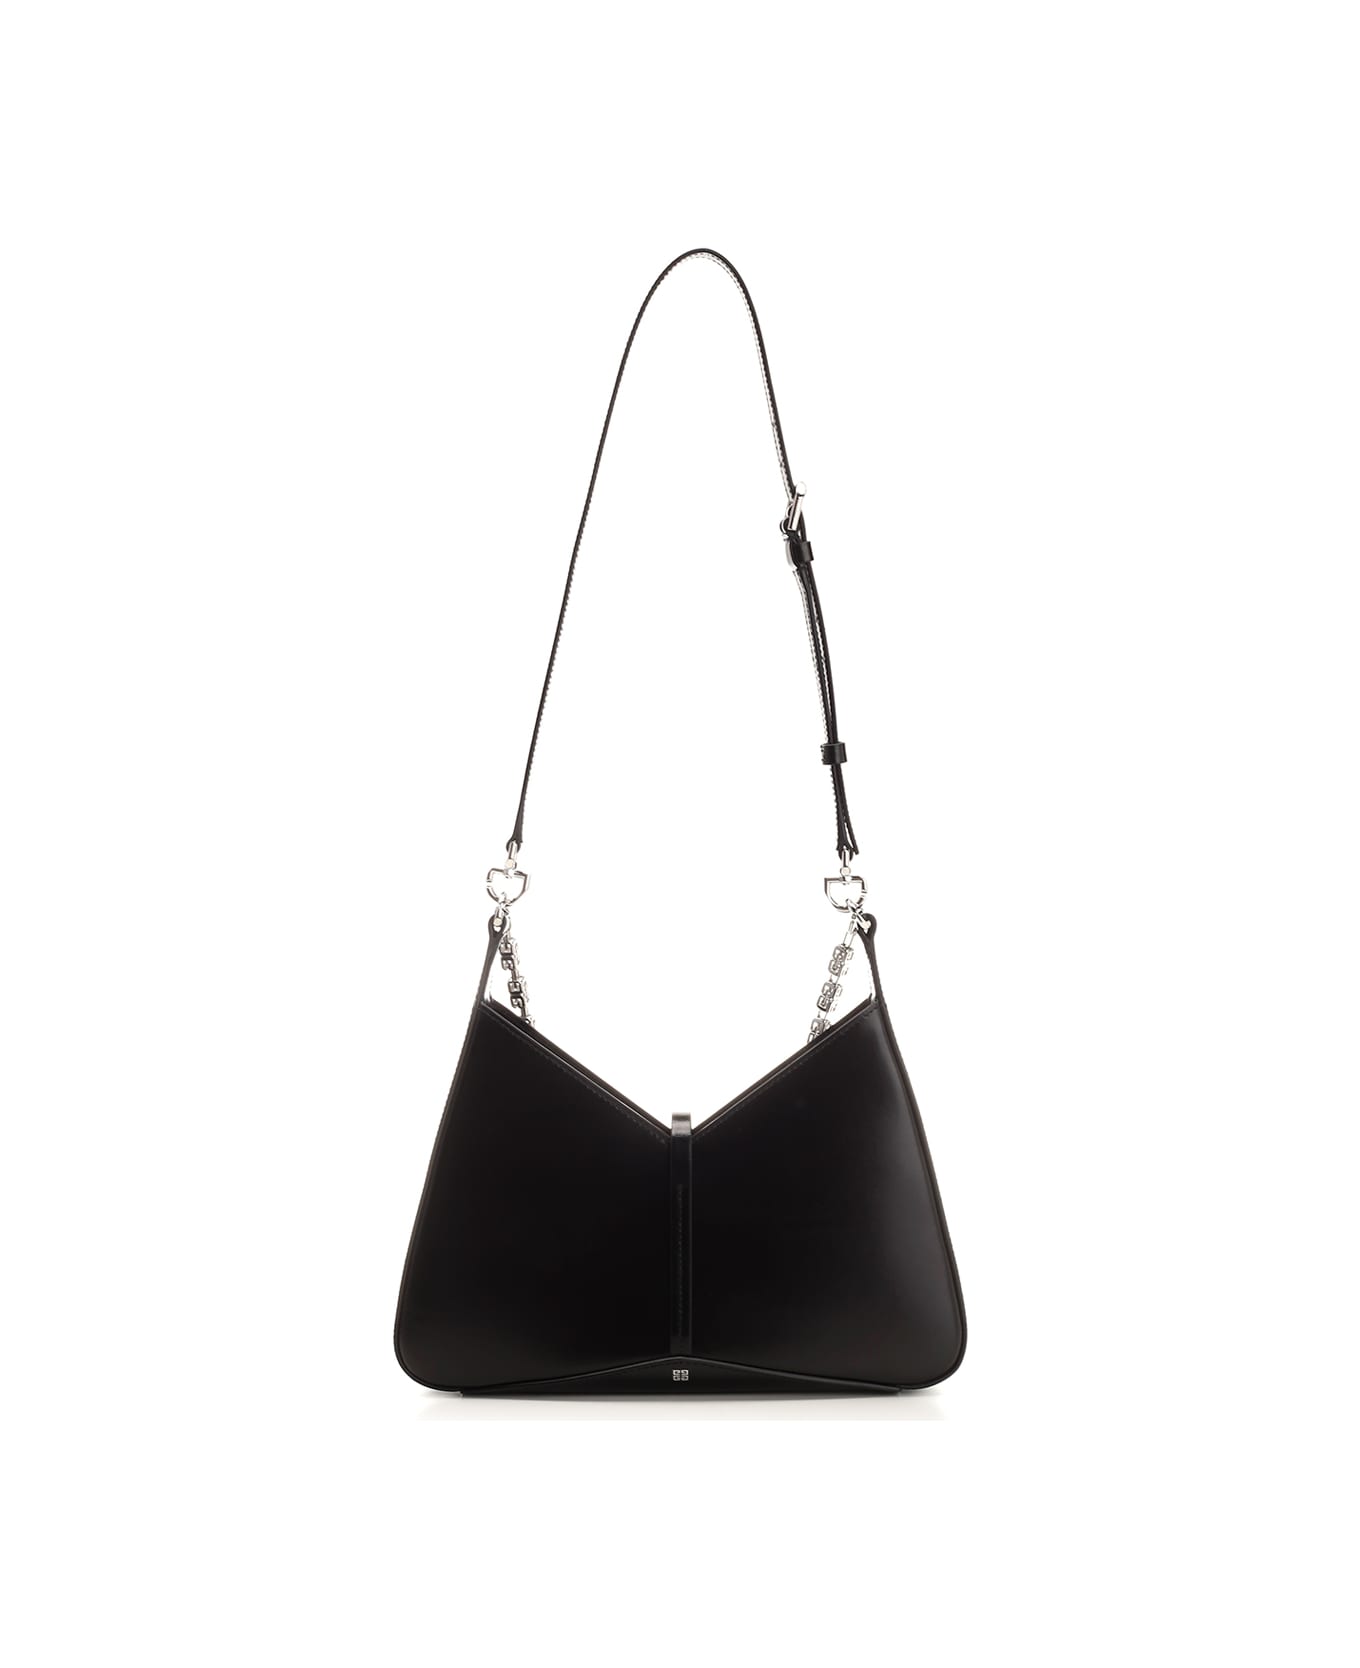 Givenchy 'cut Out' Small Cross-body Bag - Black トートバッグ